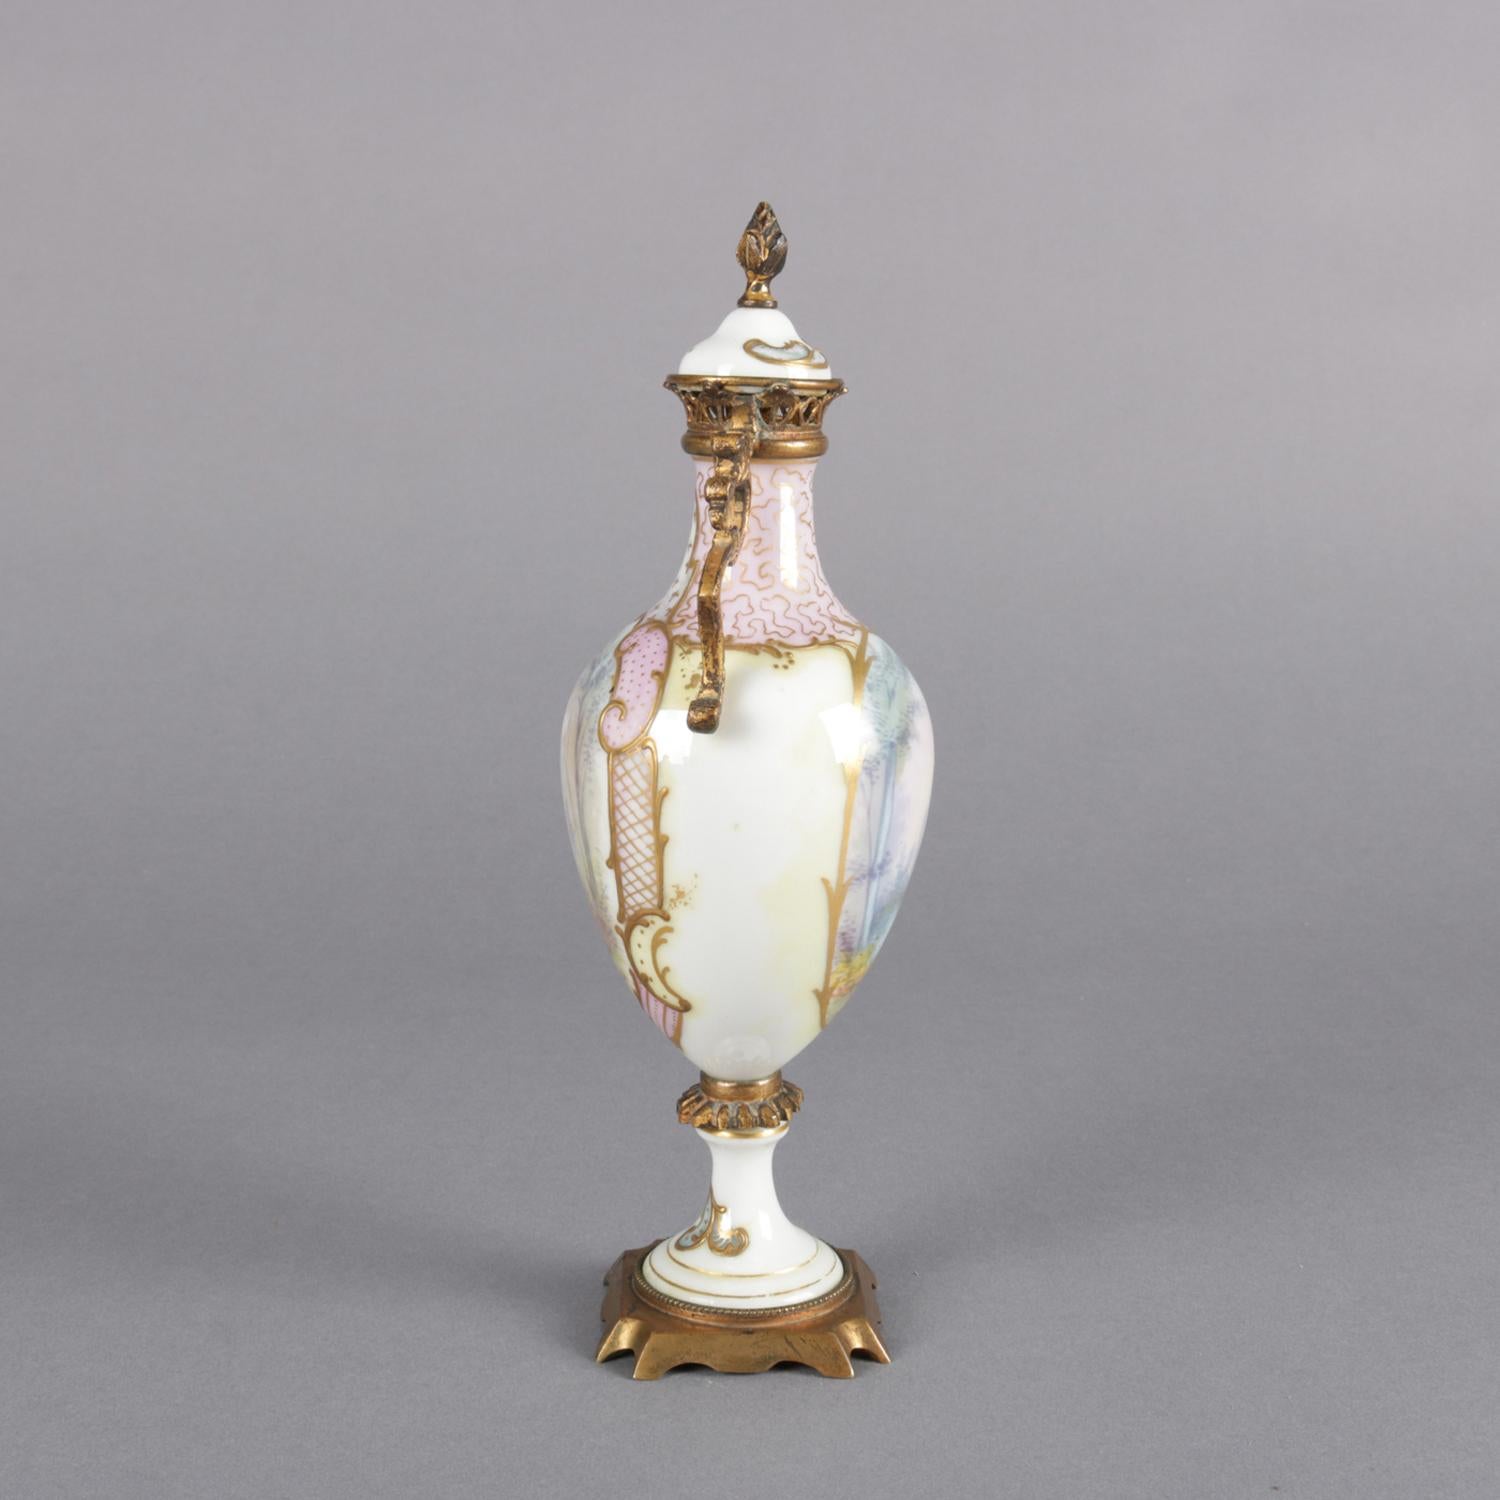 Antique French Sèvres School porcelain lidded urn features hand painted reserves with portrait of woman and landscape scenes, gilt decorated throughout and with bronze mounts, 19th century.

Measures: 8.5